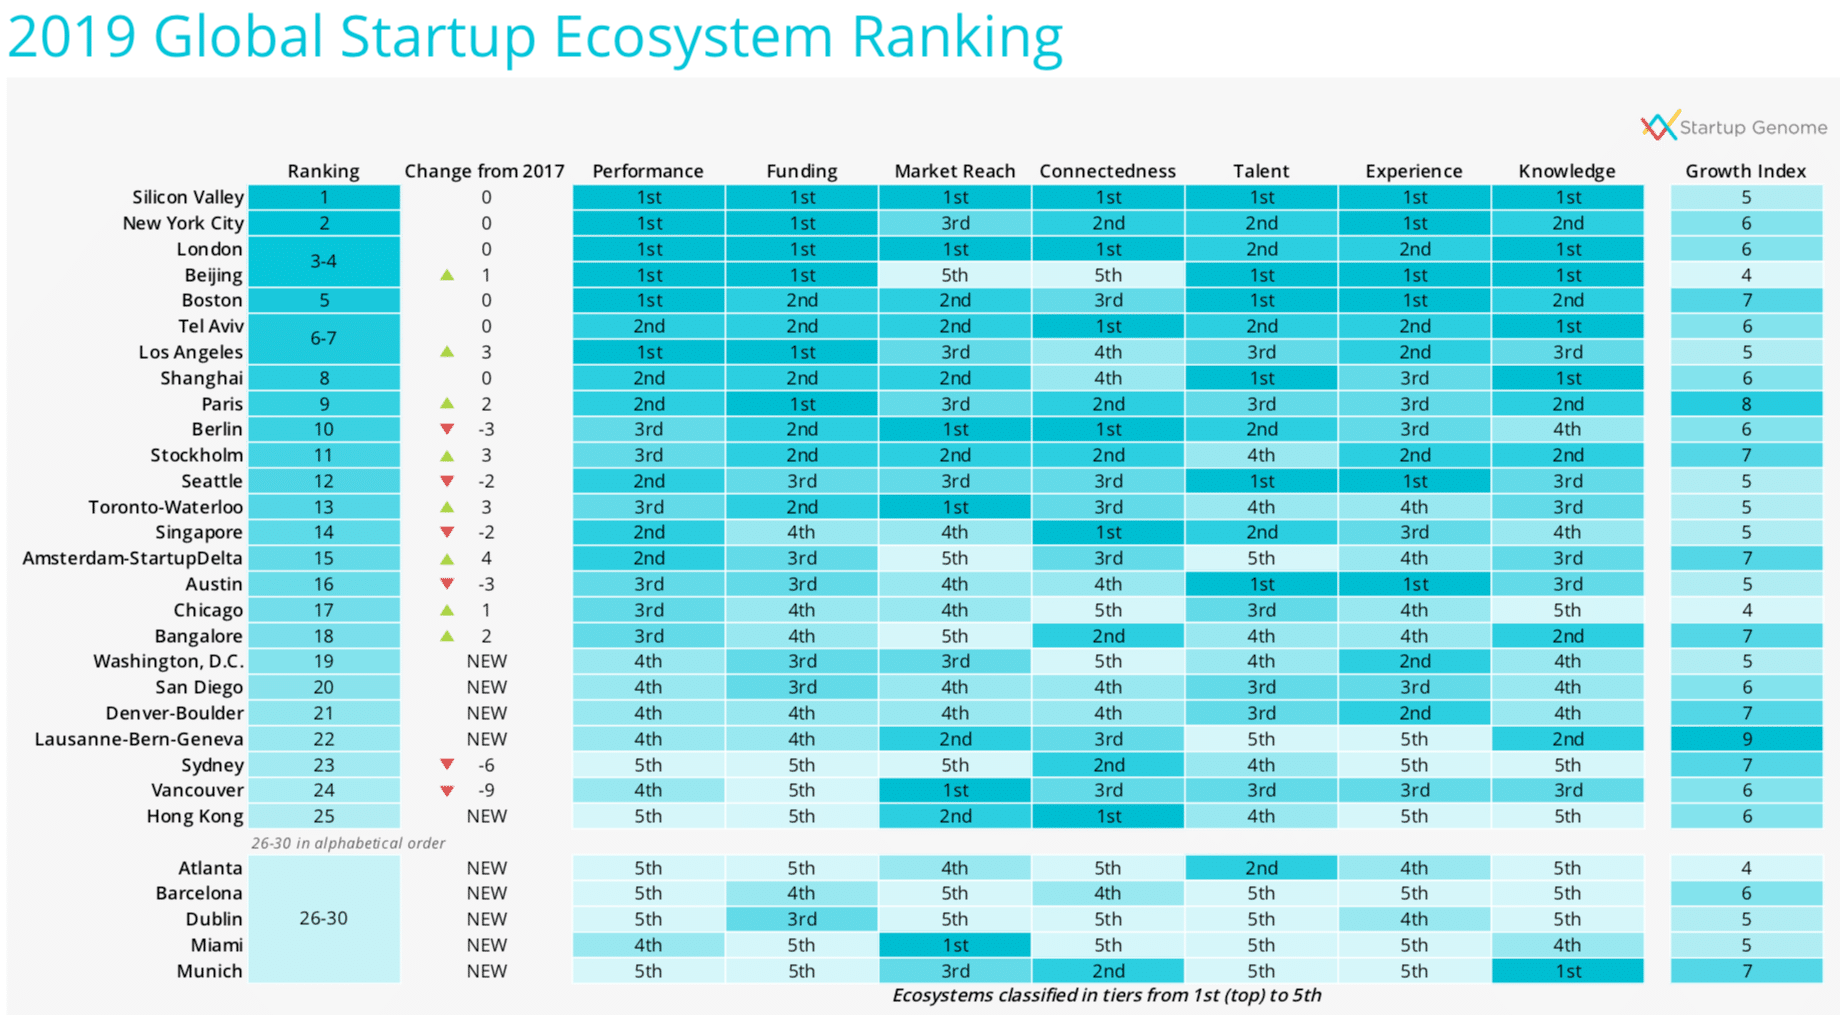 2019 Global Startup Ecosystem Report: Startup Genome Report